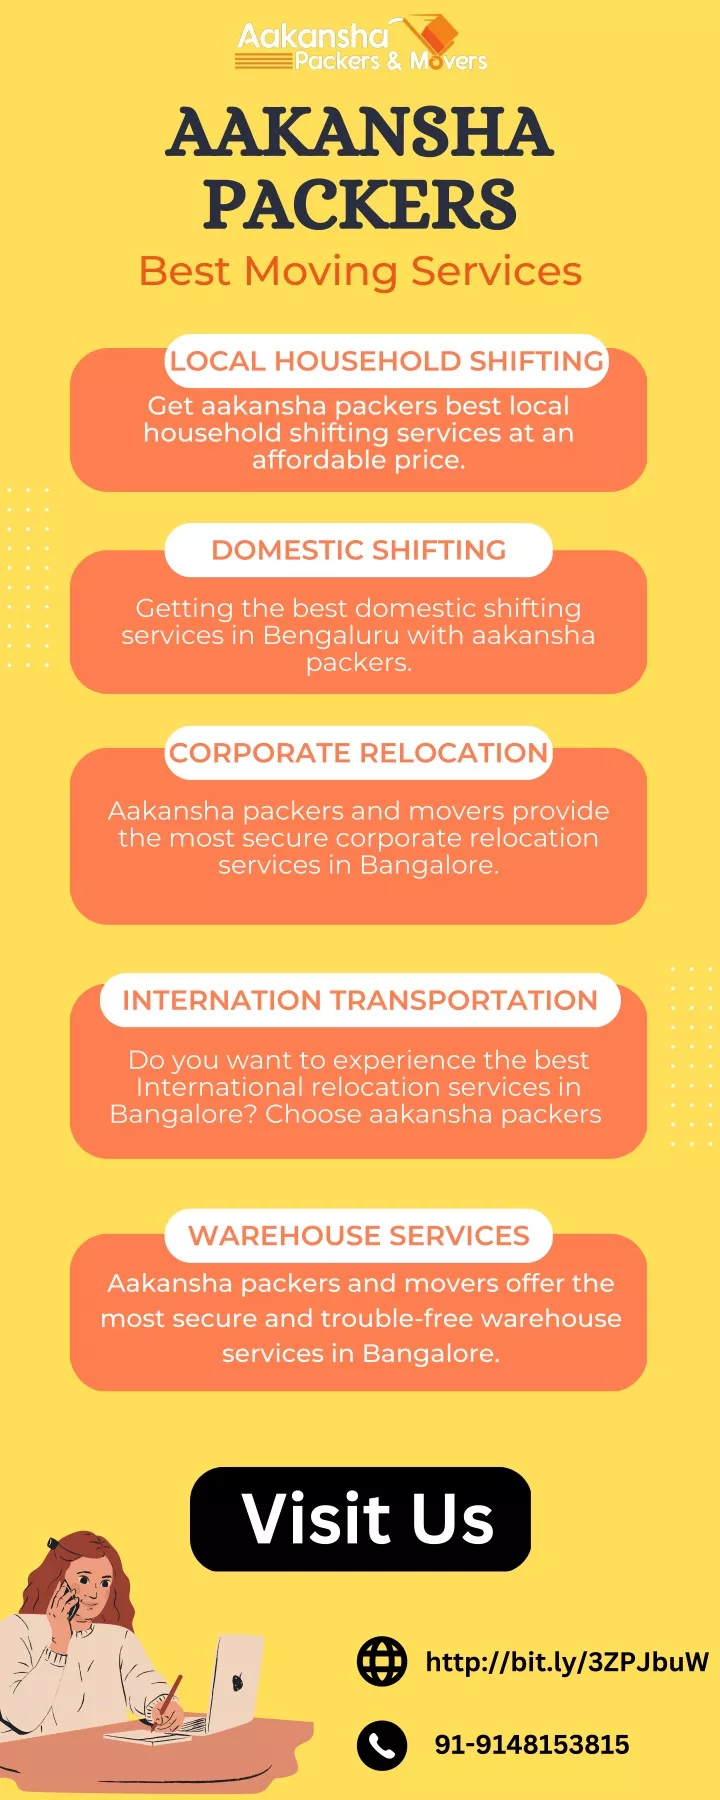 aakansha packers best moving services